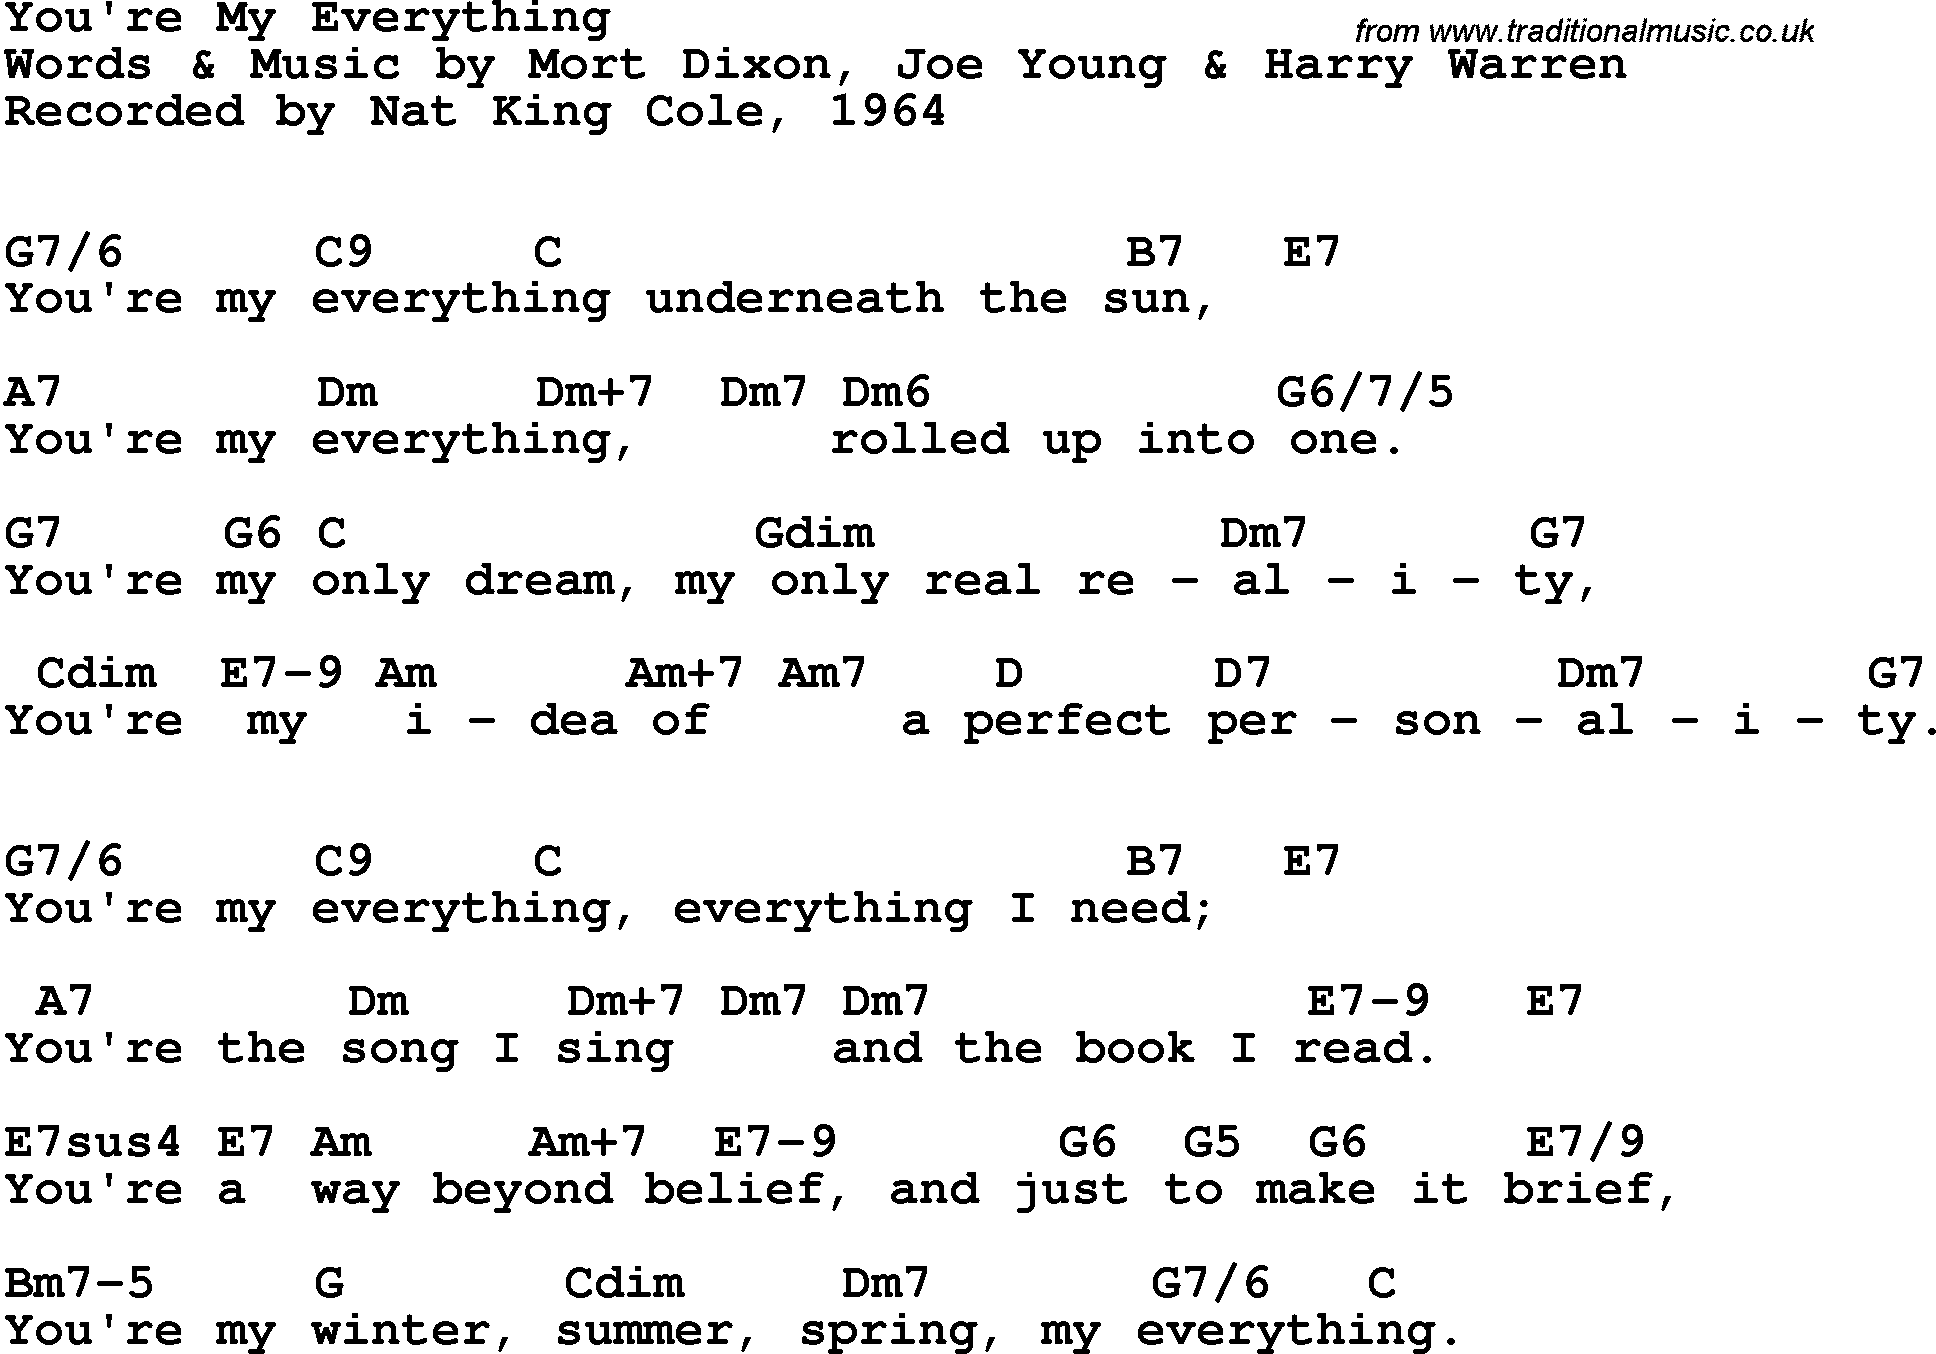 Song Lyrics with guitar chords for You're My Everything - Nat King Cole, 1964